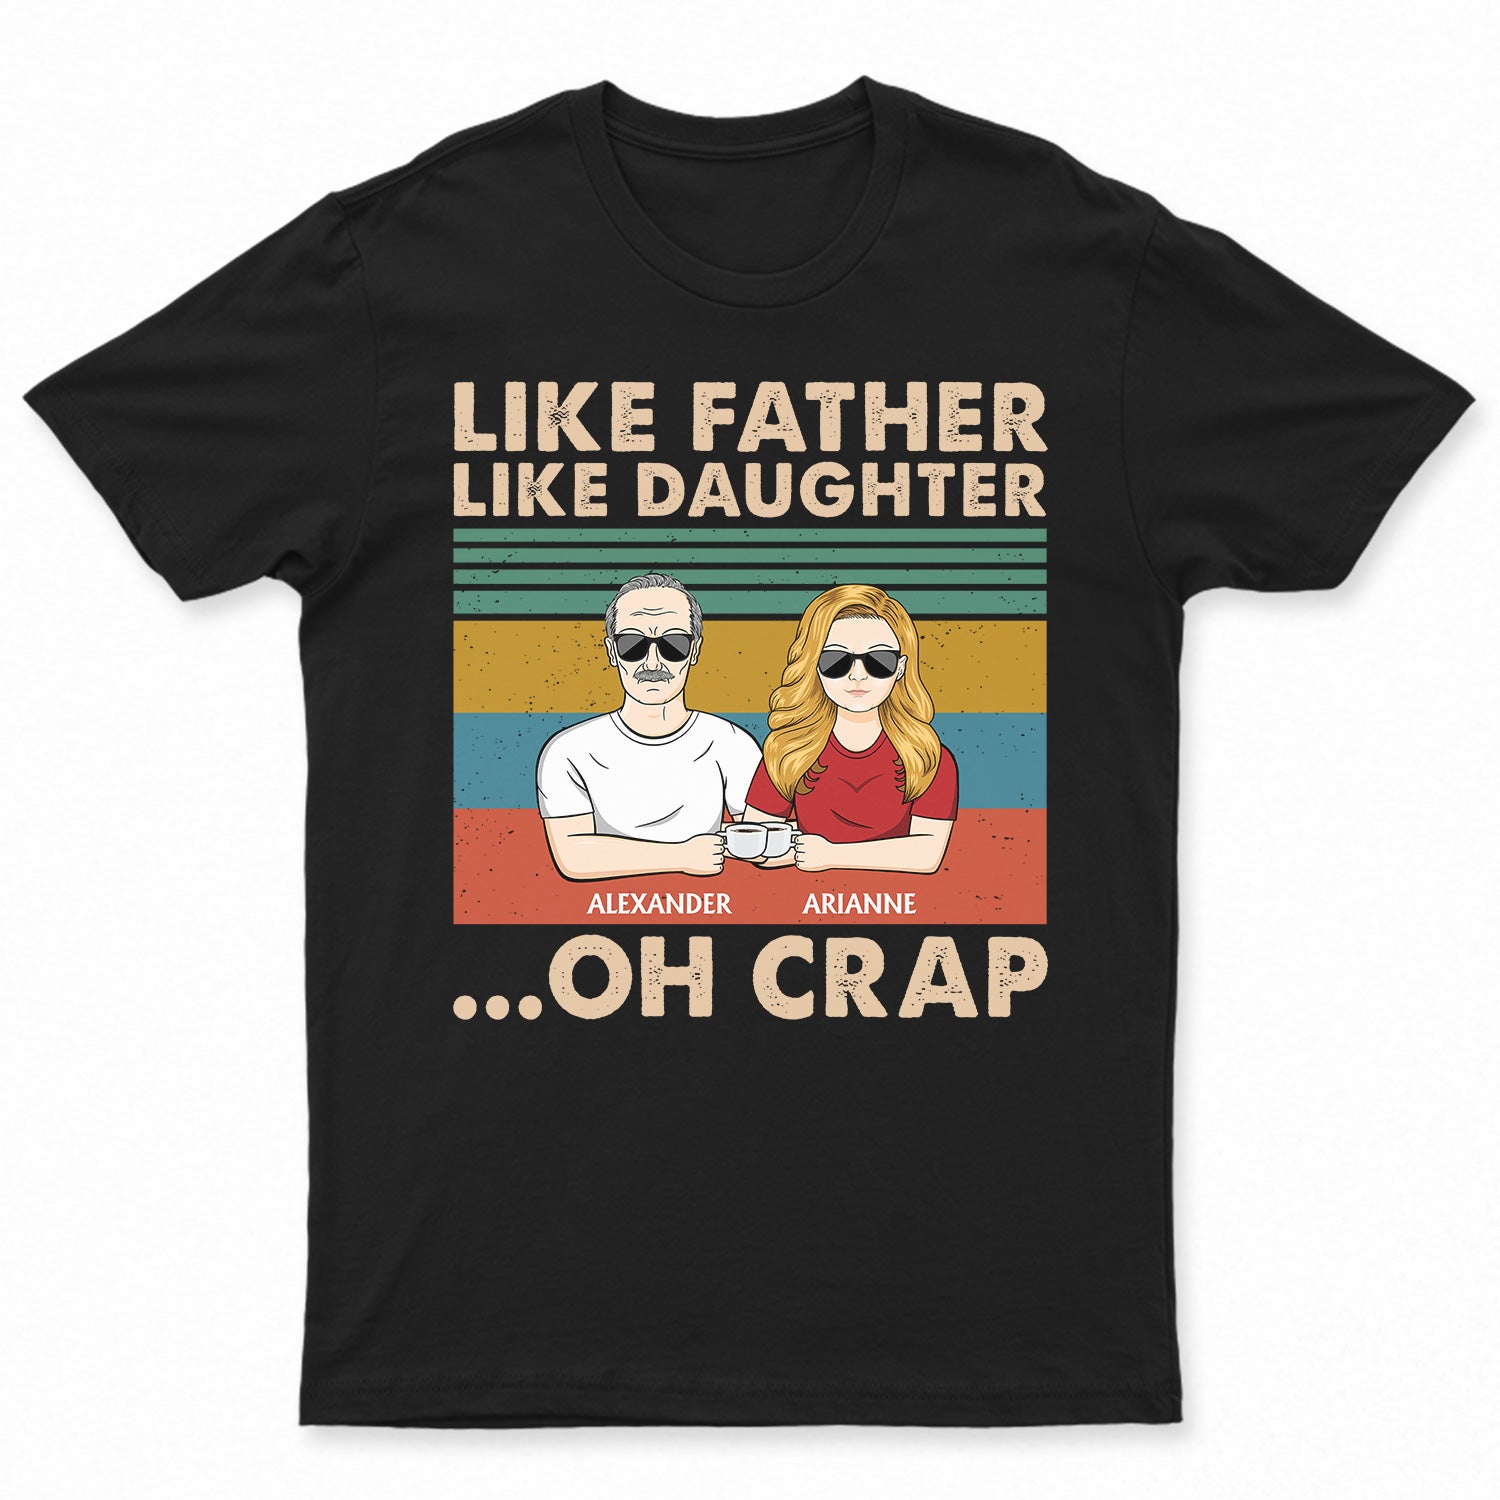 Like Father Like Daughter, Son, Granddaughter, Grandson - Birthday, Loving Gift For Dad, Grandpa, Grandfather - Personalized Custom T Shirt